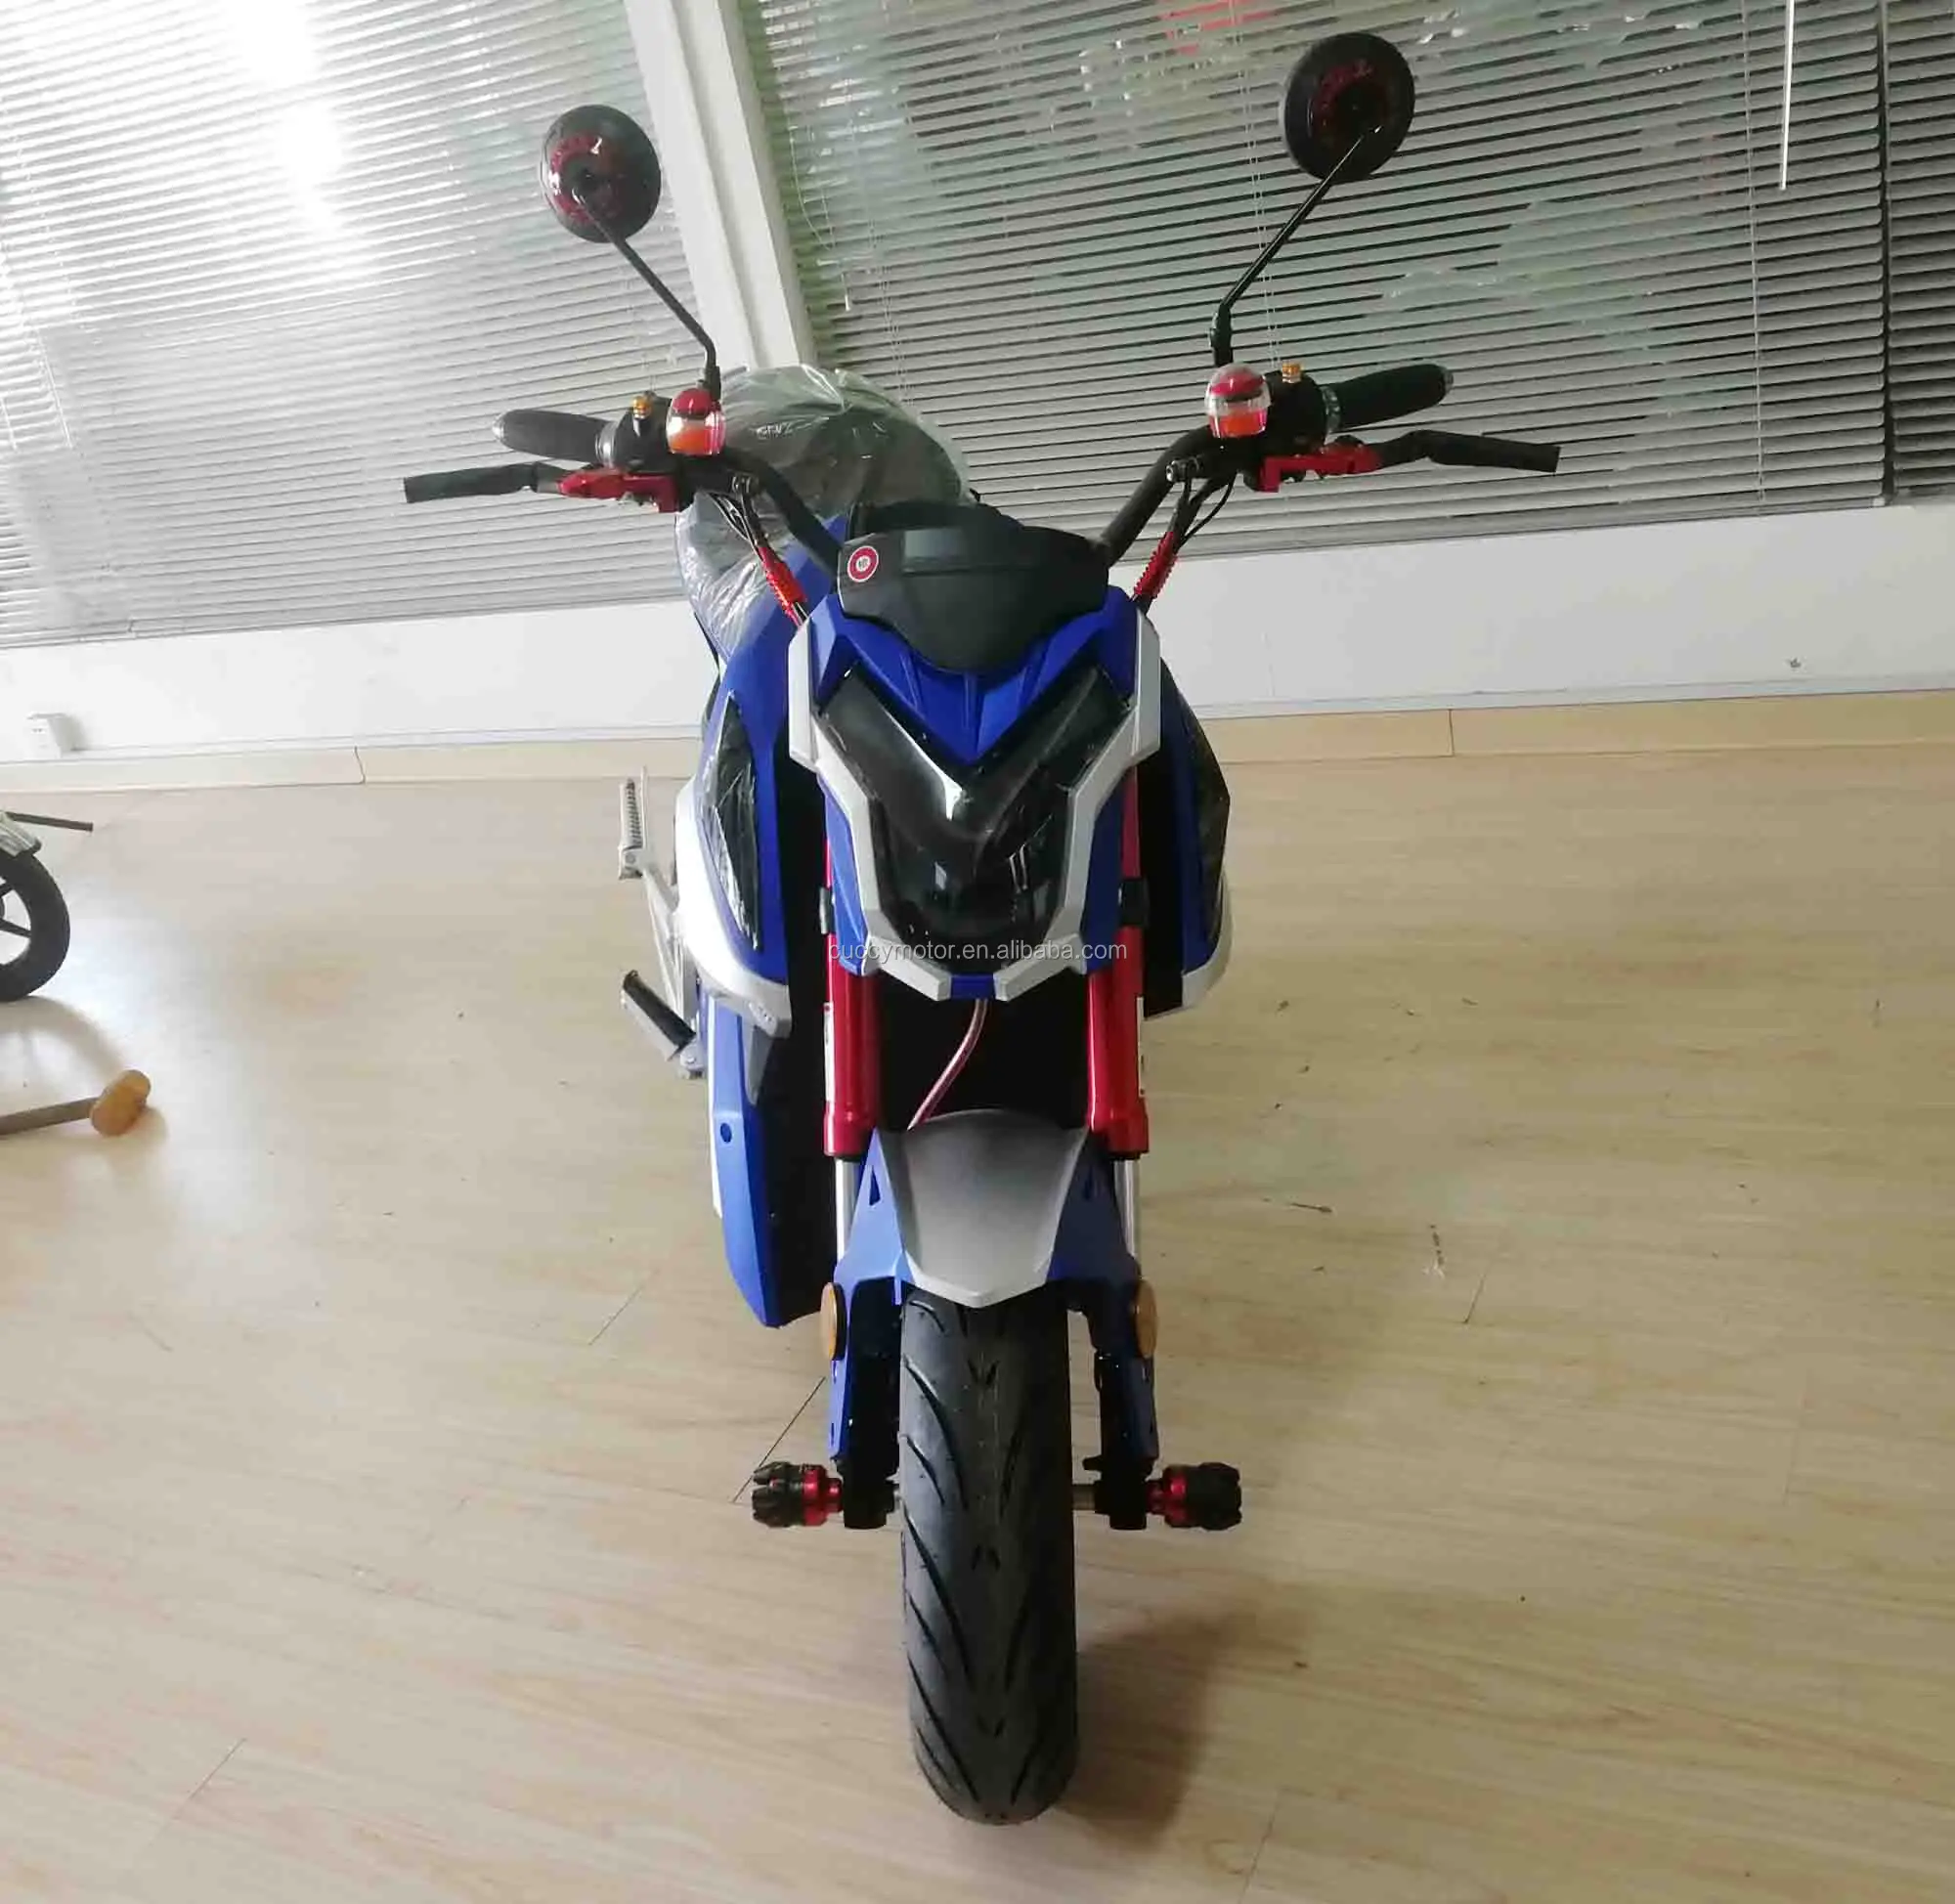 2000w 1500w 1000w Unico Motos Electricas Aguila Ava Electric Motorcycle  Racing,Dc Motor Ebike,Adult Electric Motorbike - Buy Adults Electric  Motorbike,Motorbike Electric Adult,Electric Motorbike Adult Product on  